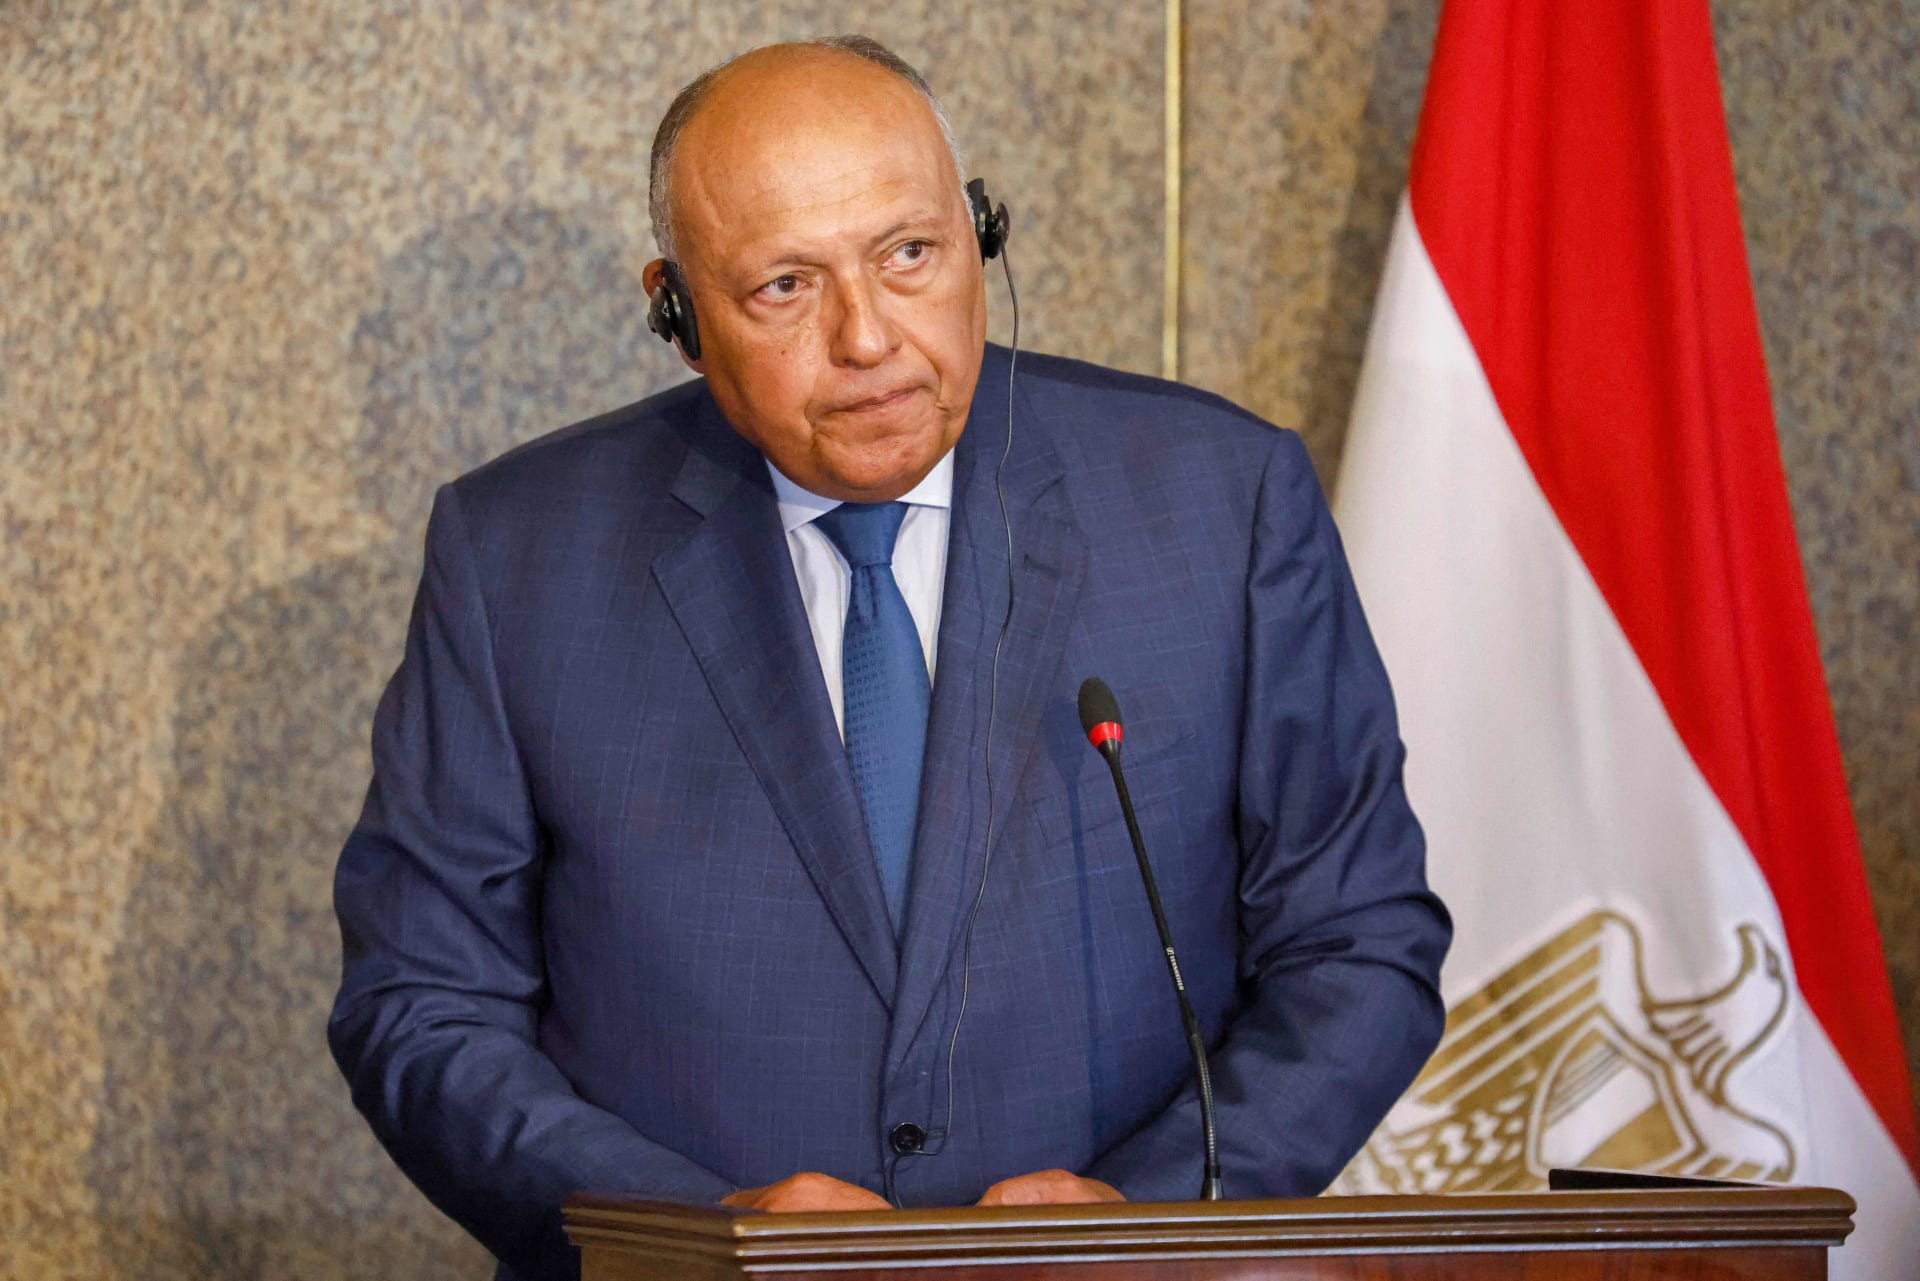 Shoukry, head of the Egyptian delegation, at the activities of the opening session of the 42nd session of the Executive Council of the African Union